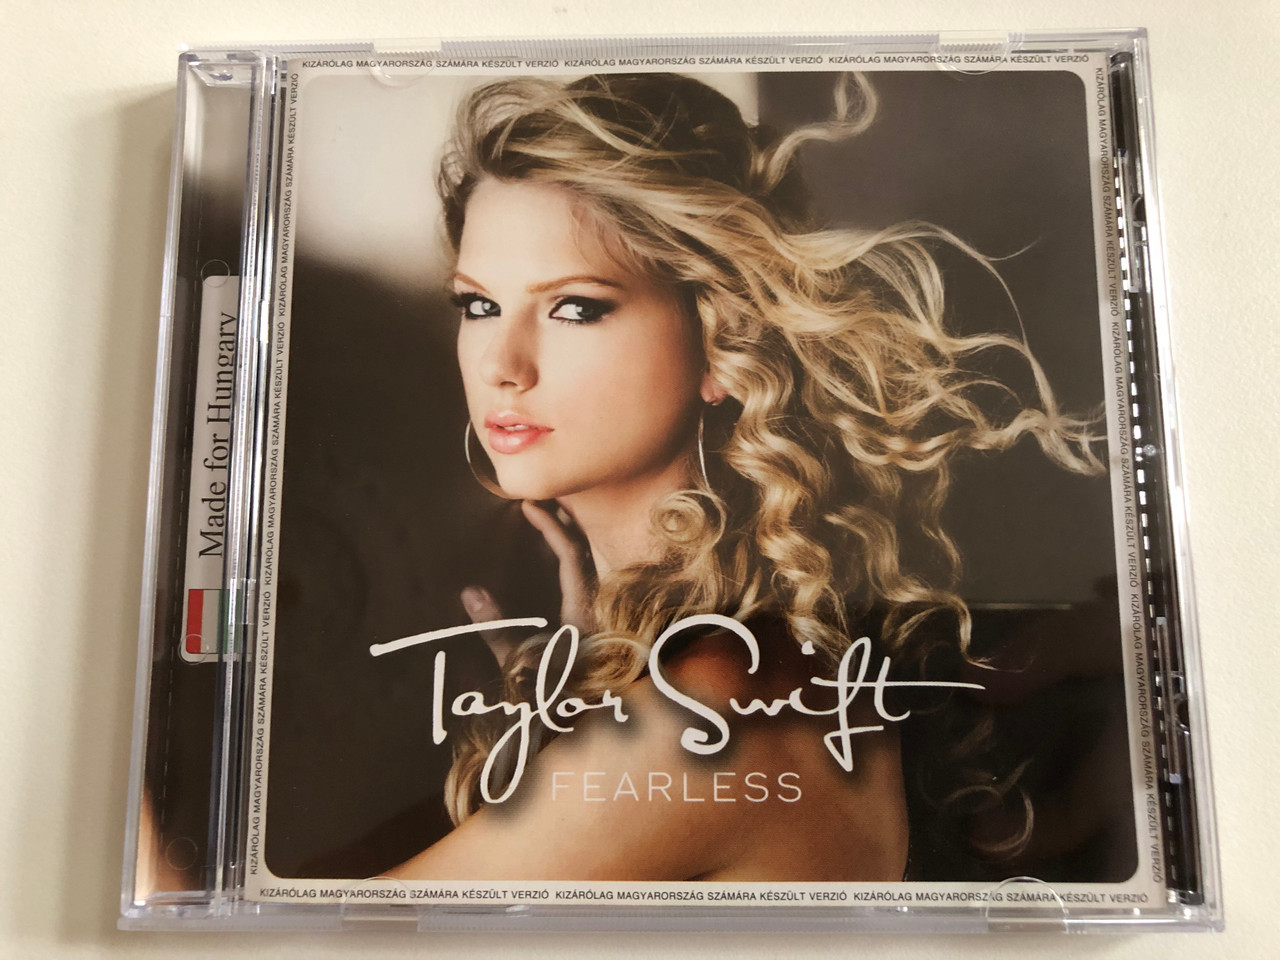 Taylor Swift – Fearless / Made For Hungary / Big Machine Records Audio CD  2009 / 0602517984103(83) - Bible in My Language